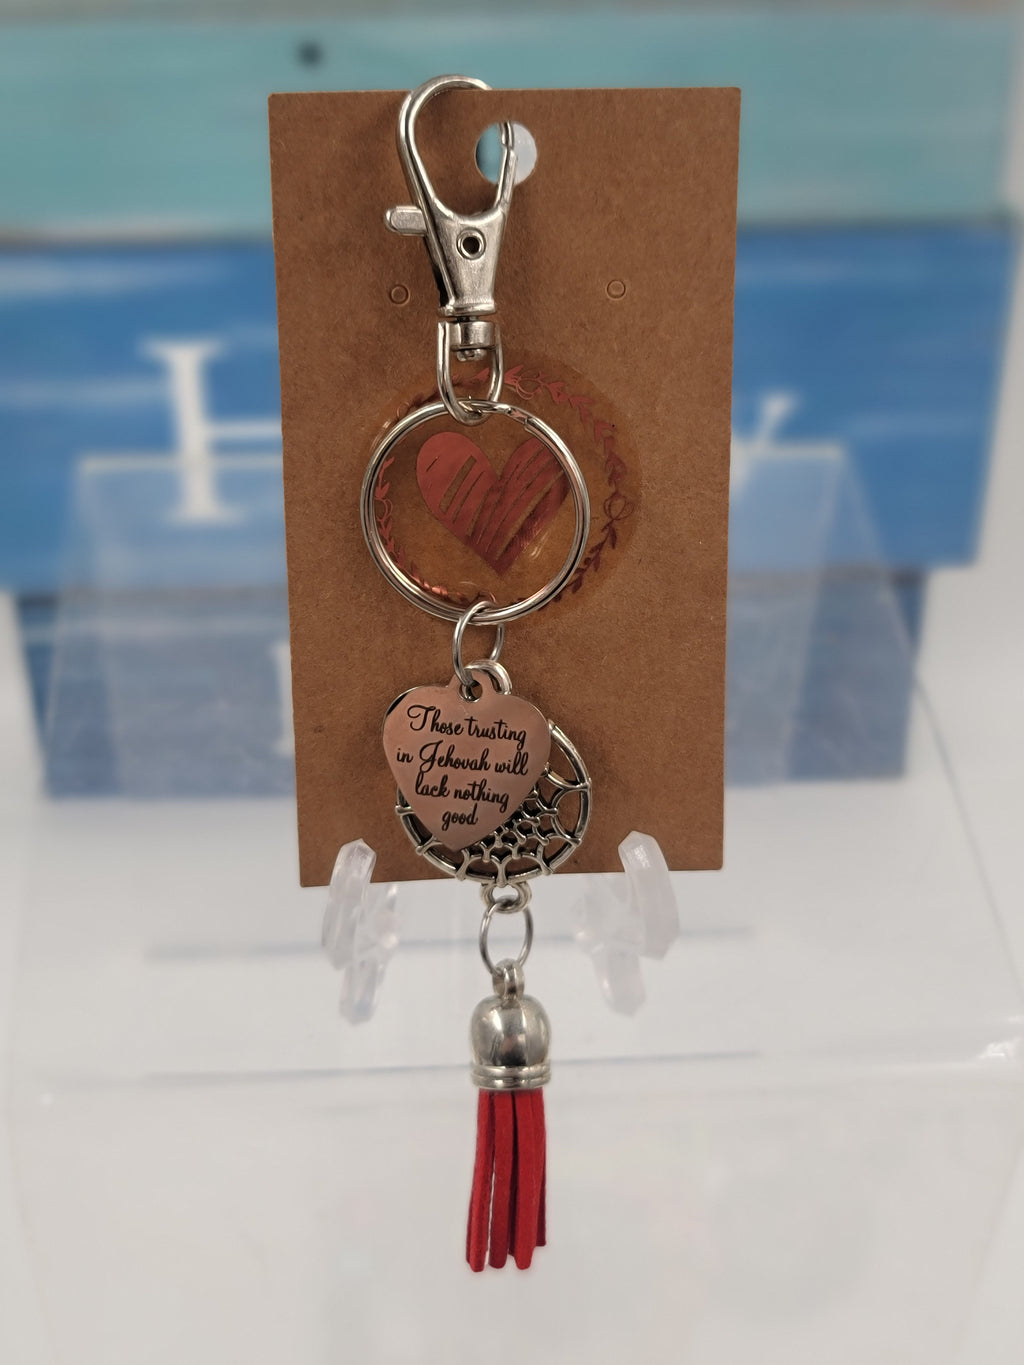 K12 "Those Trusting In Jehovah Will Lack Nothing Good" Keychain